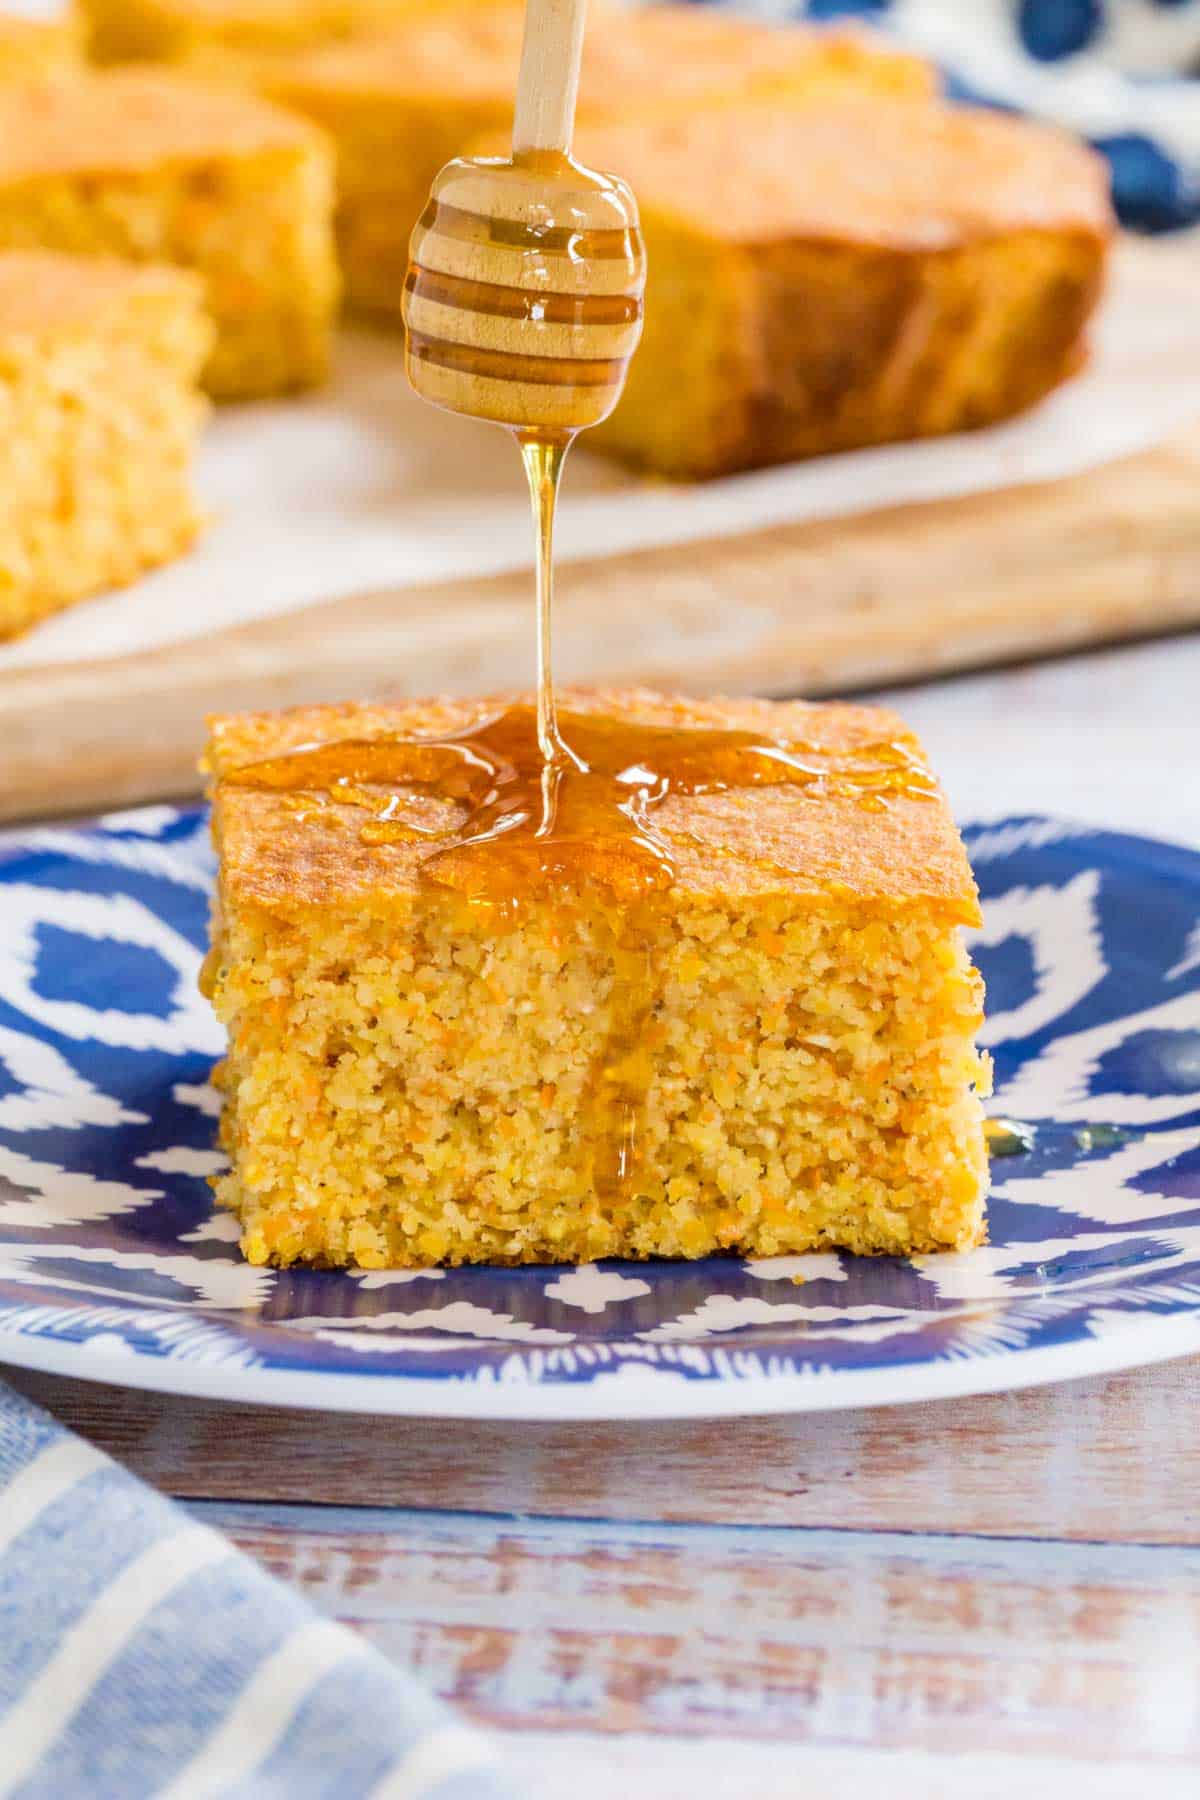 slice of cornbread with honey being drizzled on top